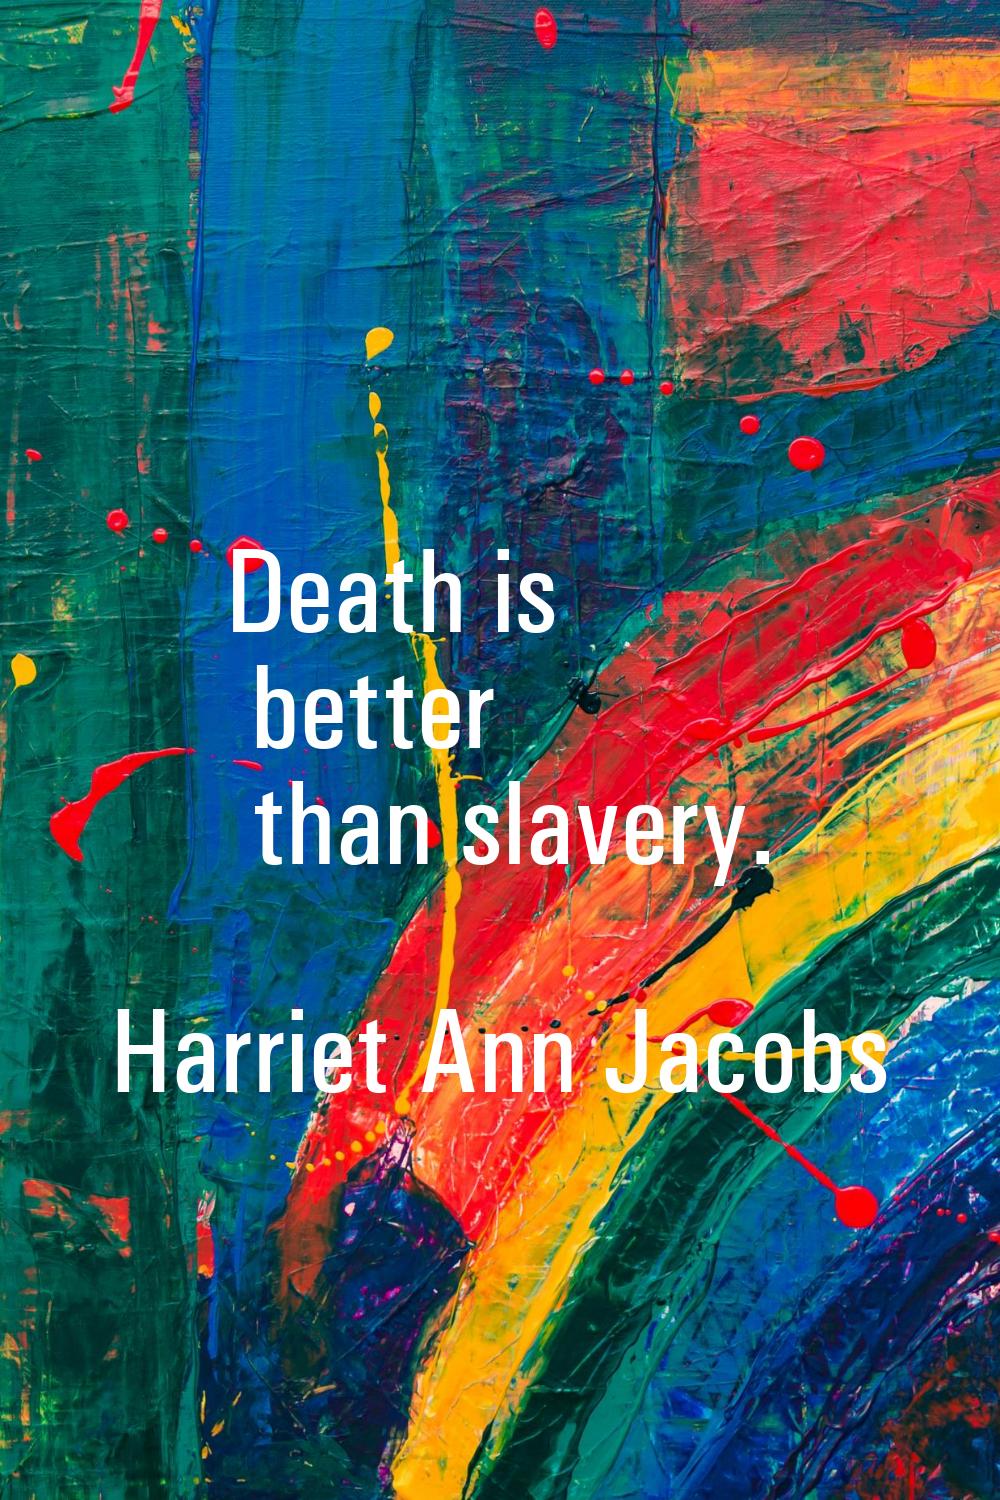 Death is better than slavery.